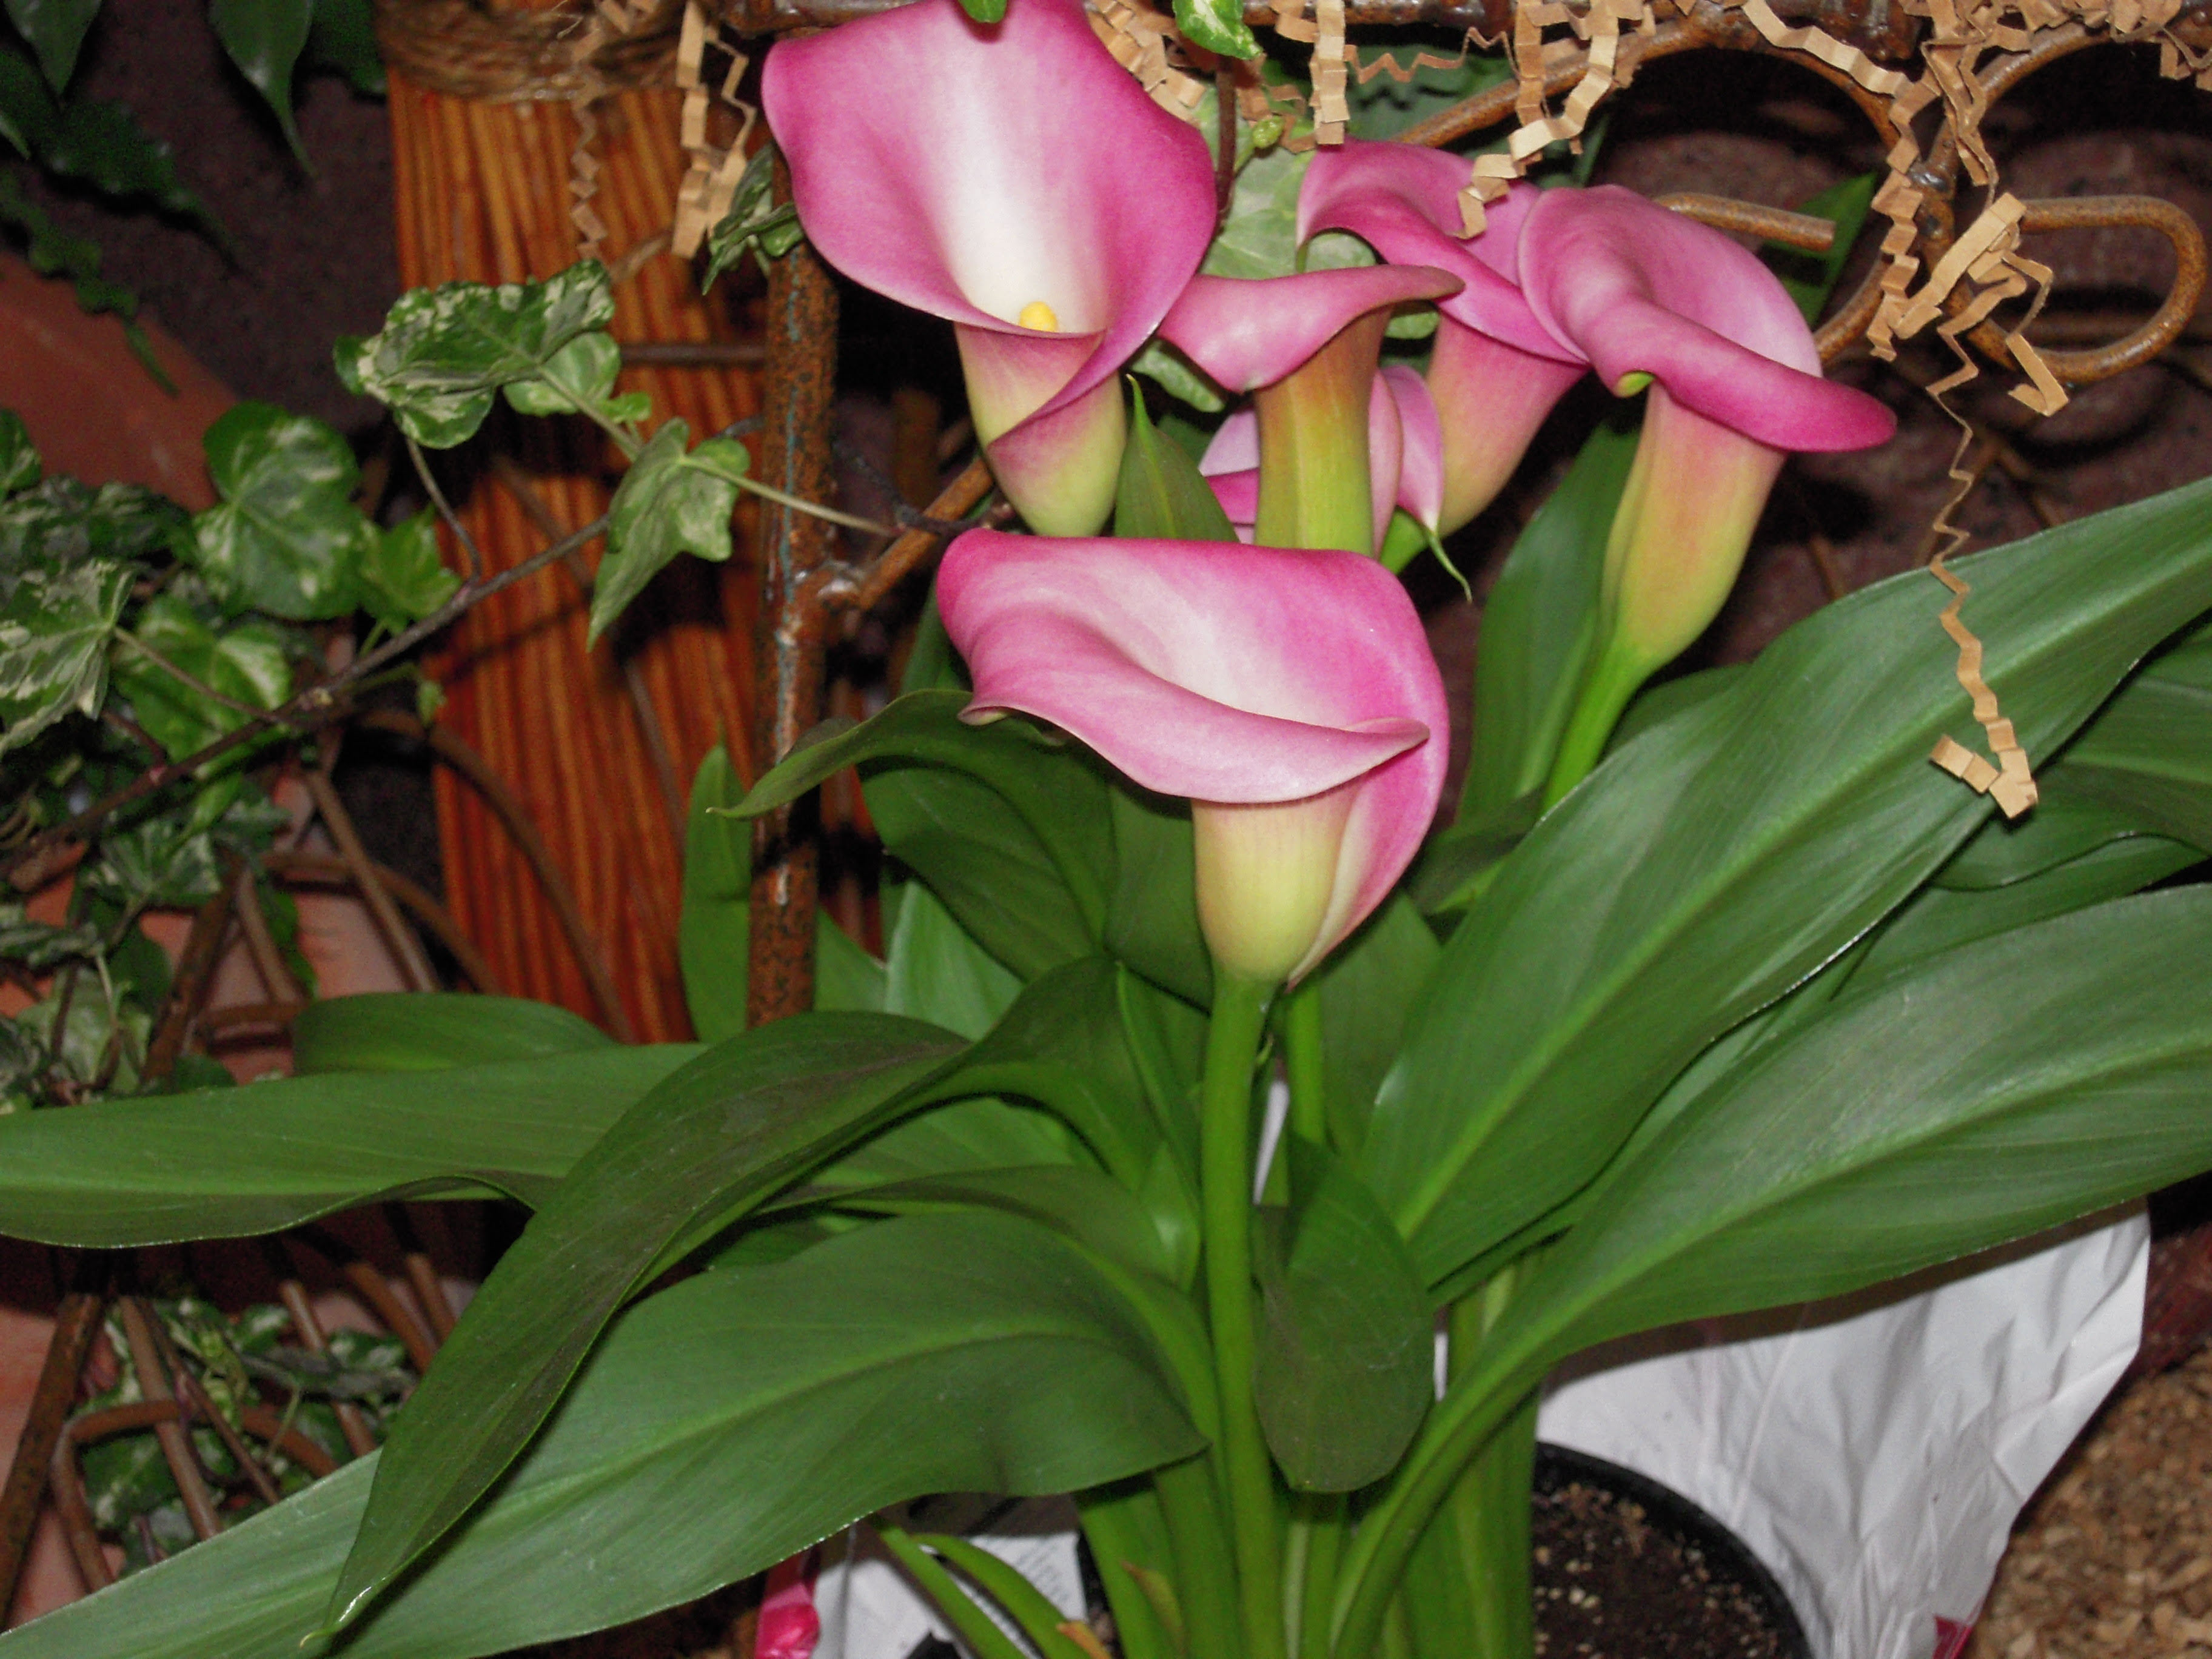 Calla Lily and Cats - Calla Lilies and Cats